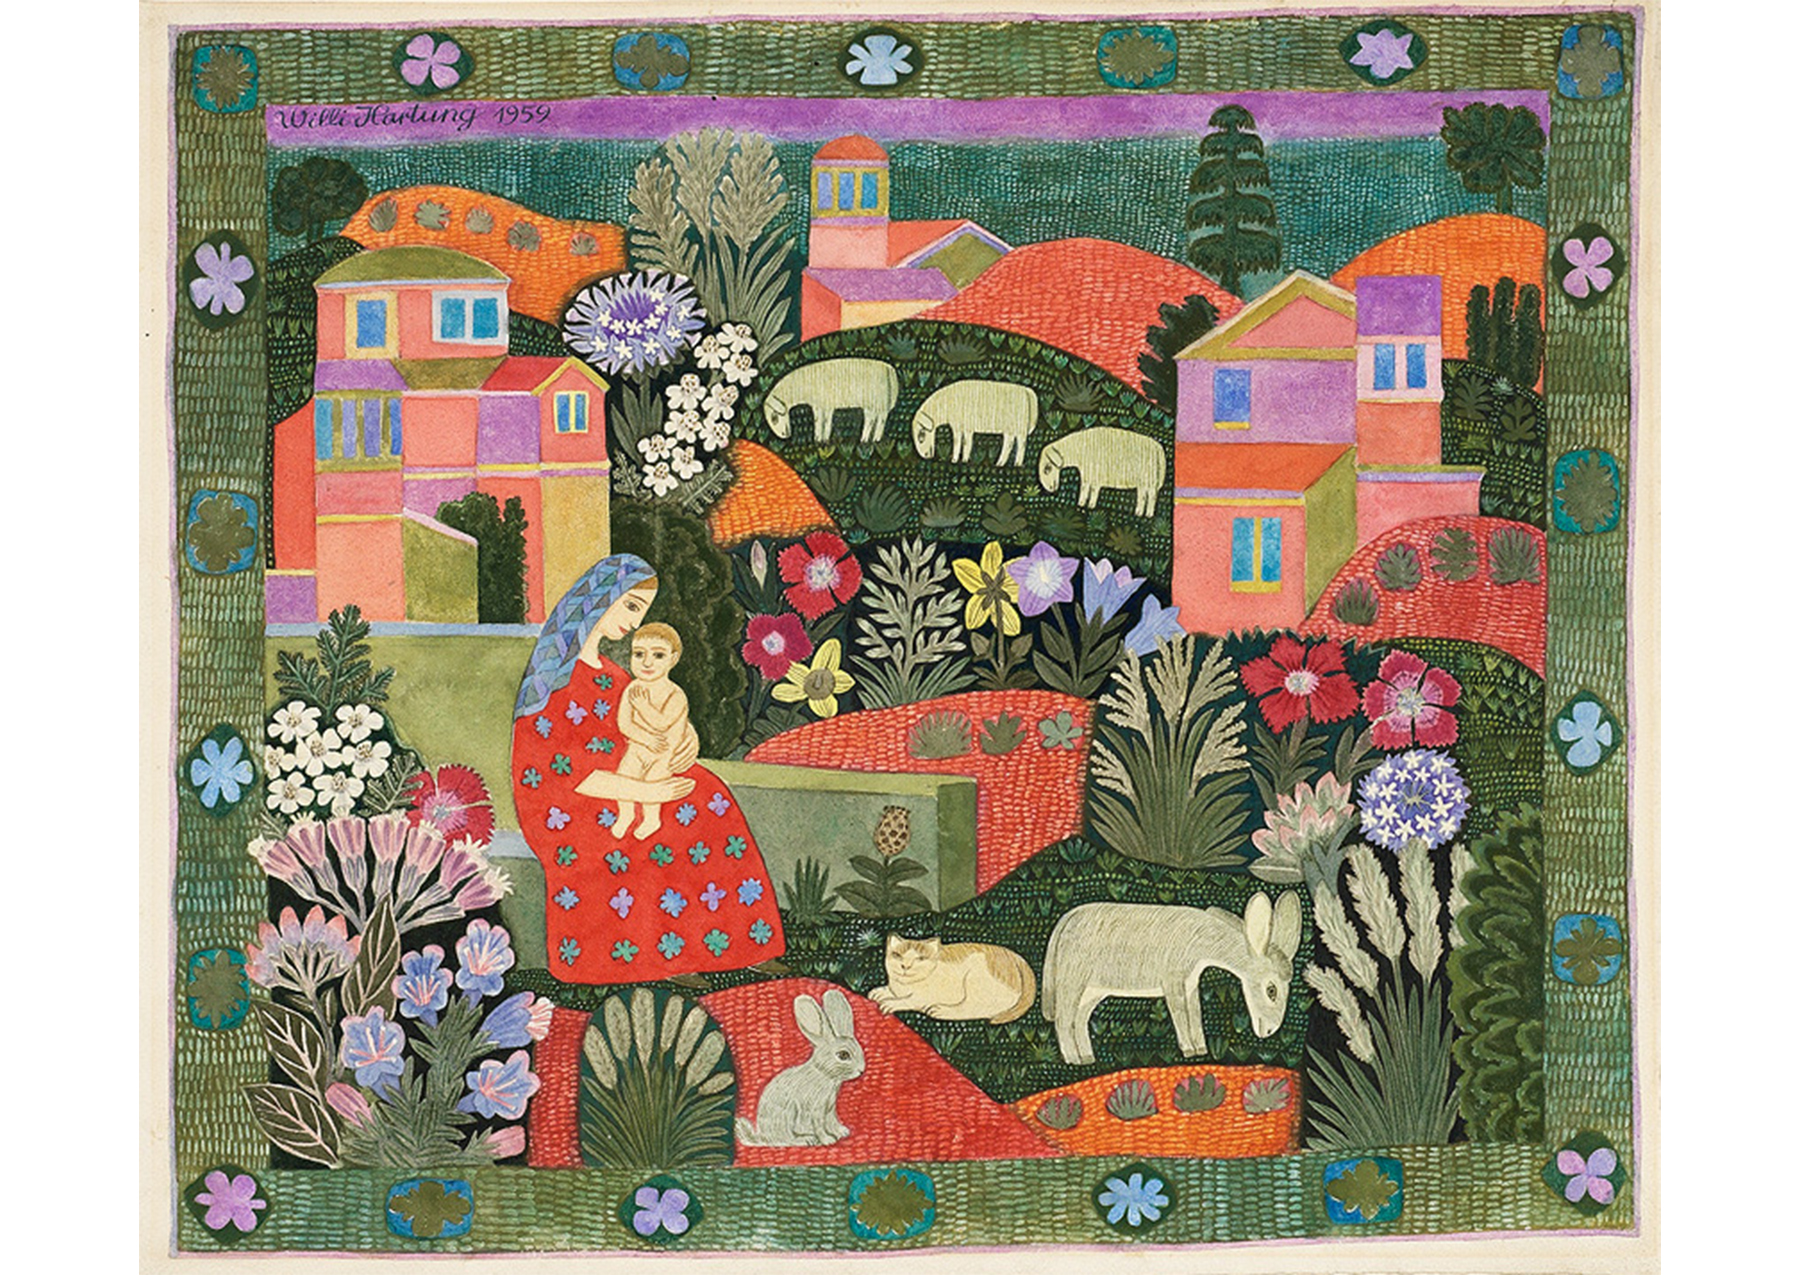 fanciful landscape with flowers, scattered buildings a rabbit, cat and donkey near a woman holding a naked child